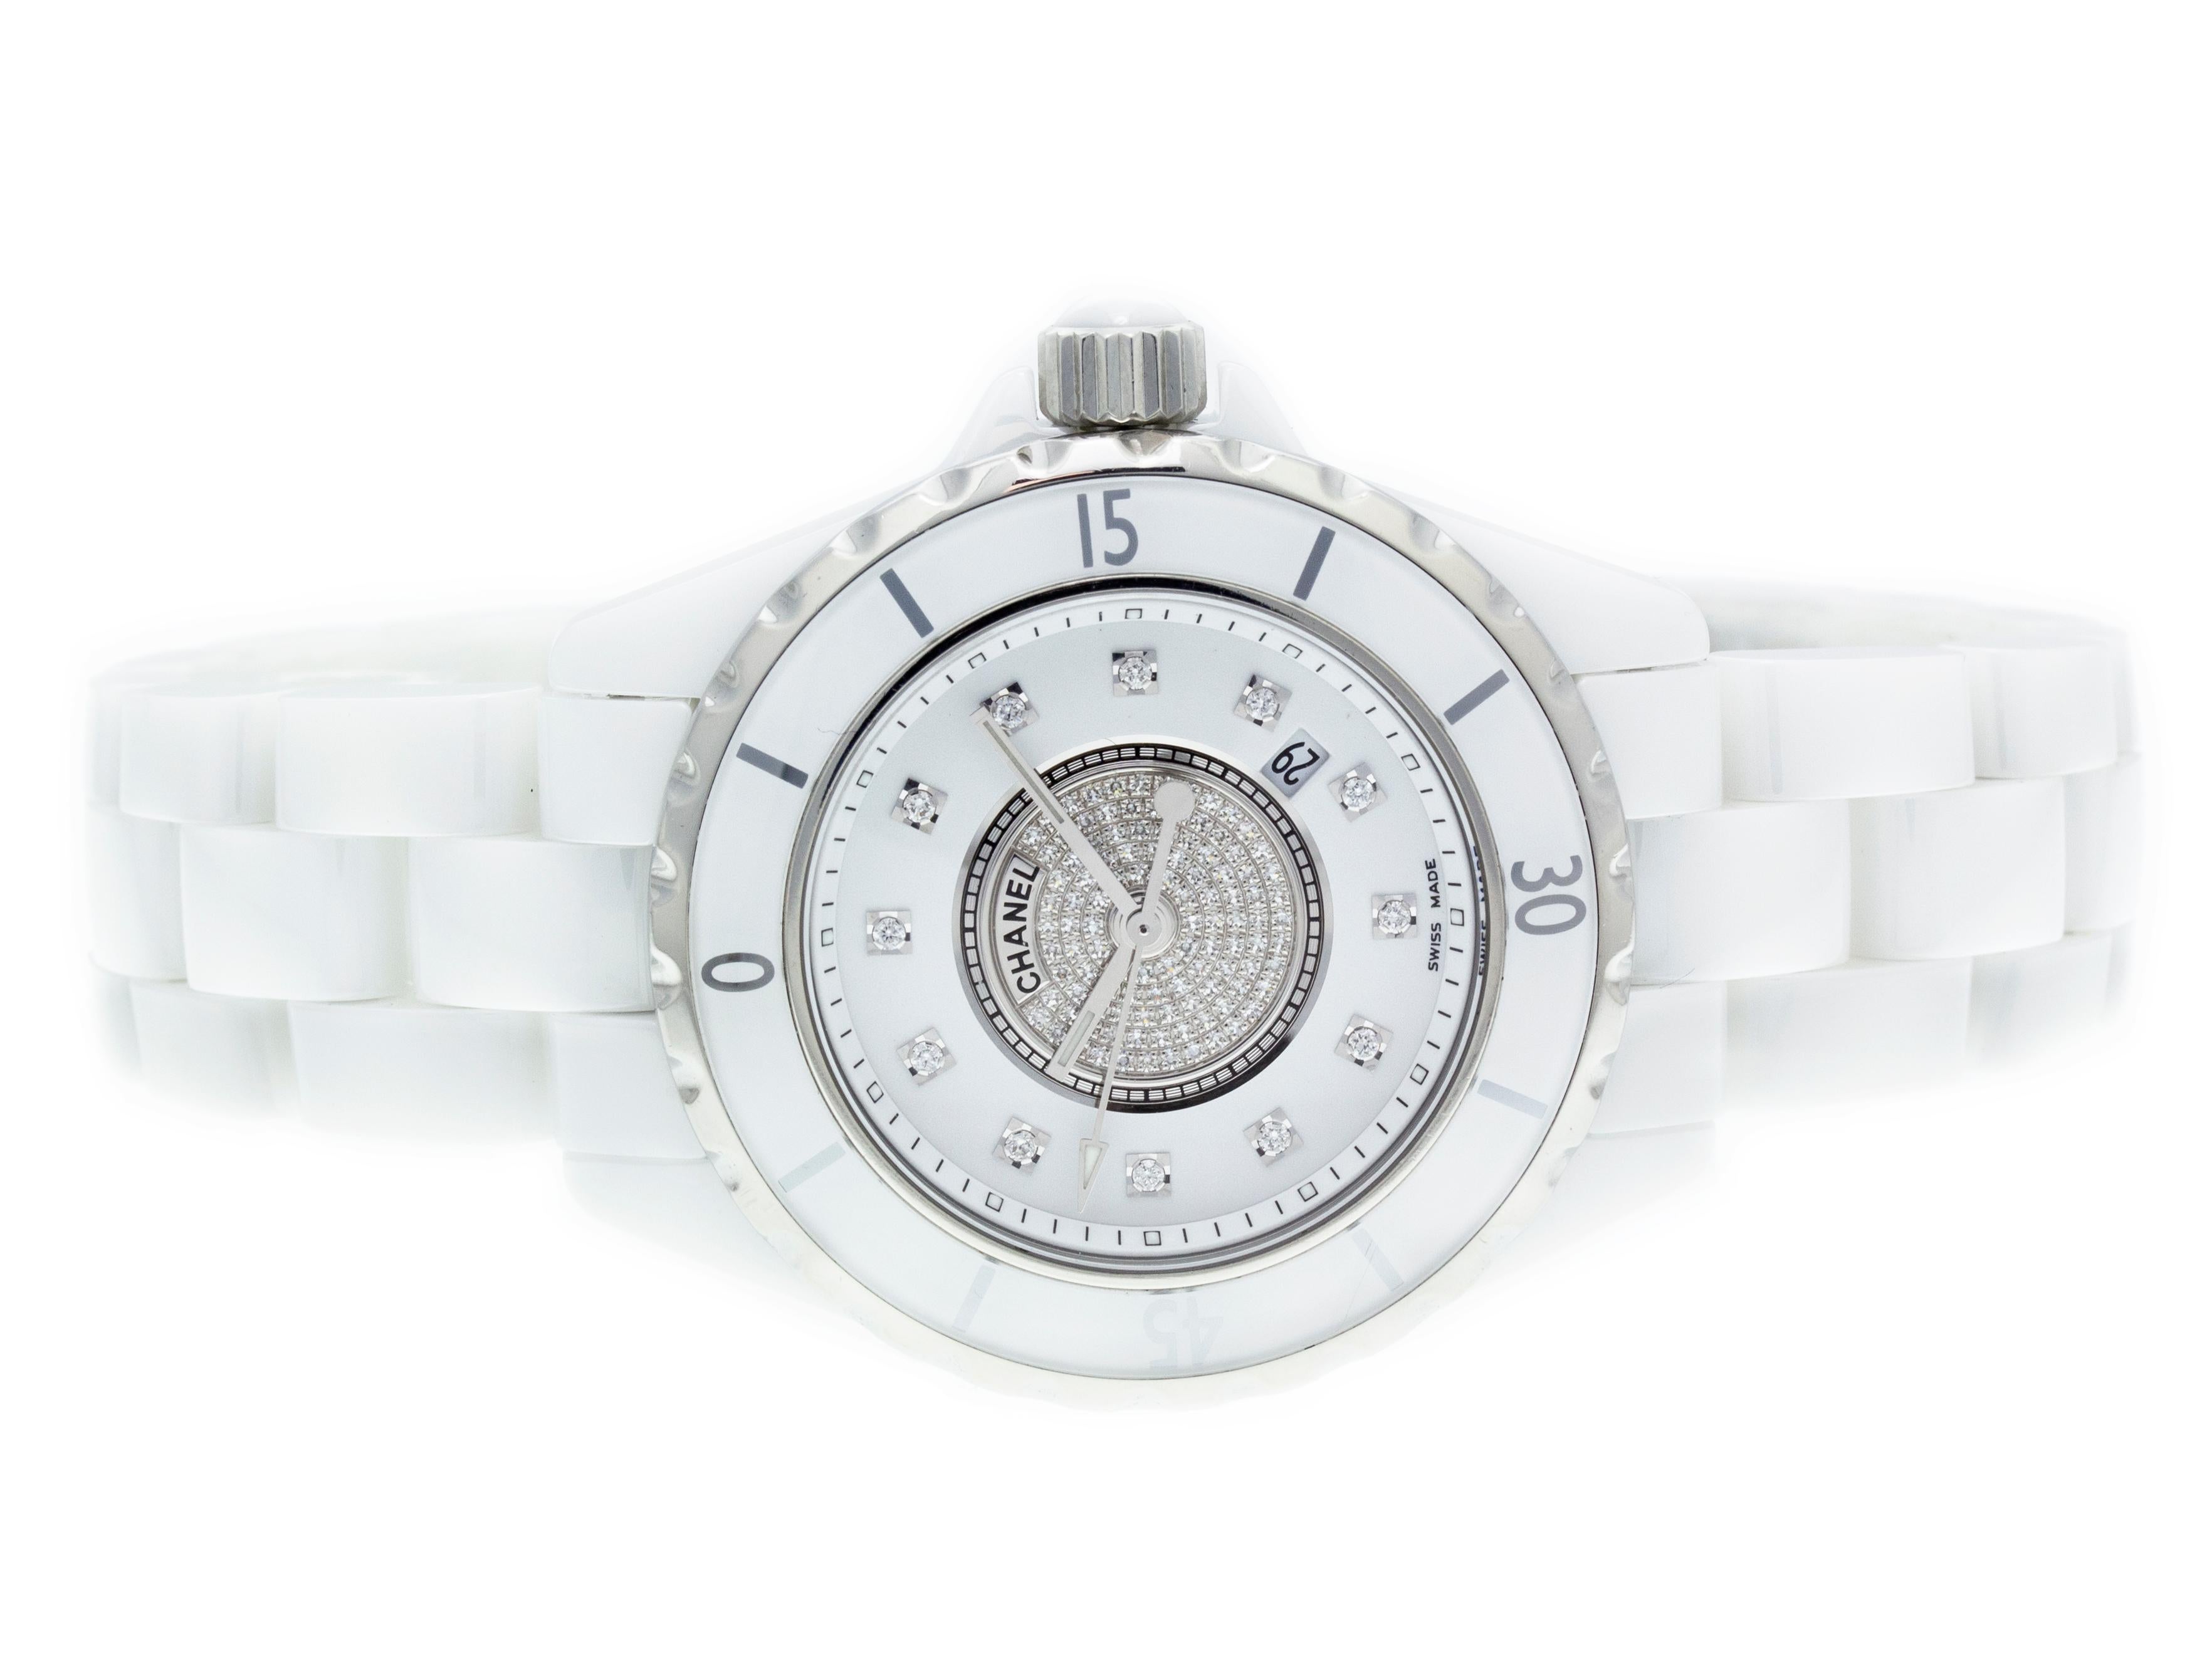 Chanel J12 H2123 white ceramic bracelet watch, with white pave diamond dial w/ diamond hour markers, water resistance to 200m, with date.

Watch	
Brand:	Chanel
Series:	J12
Model #:	H2123
Gender:	Ladies
Condition:	Great Display Model, Tiny Dings &